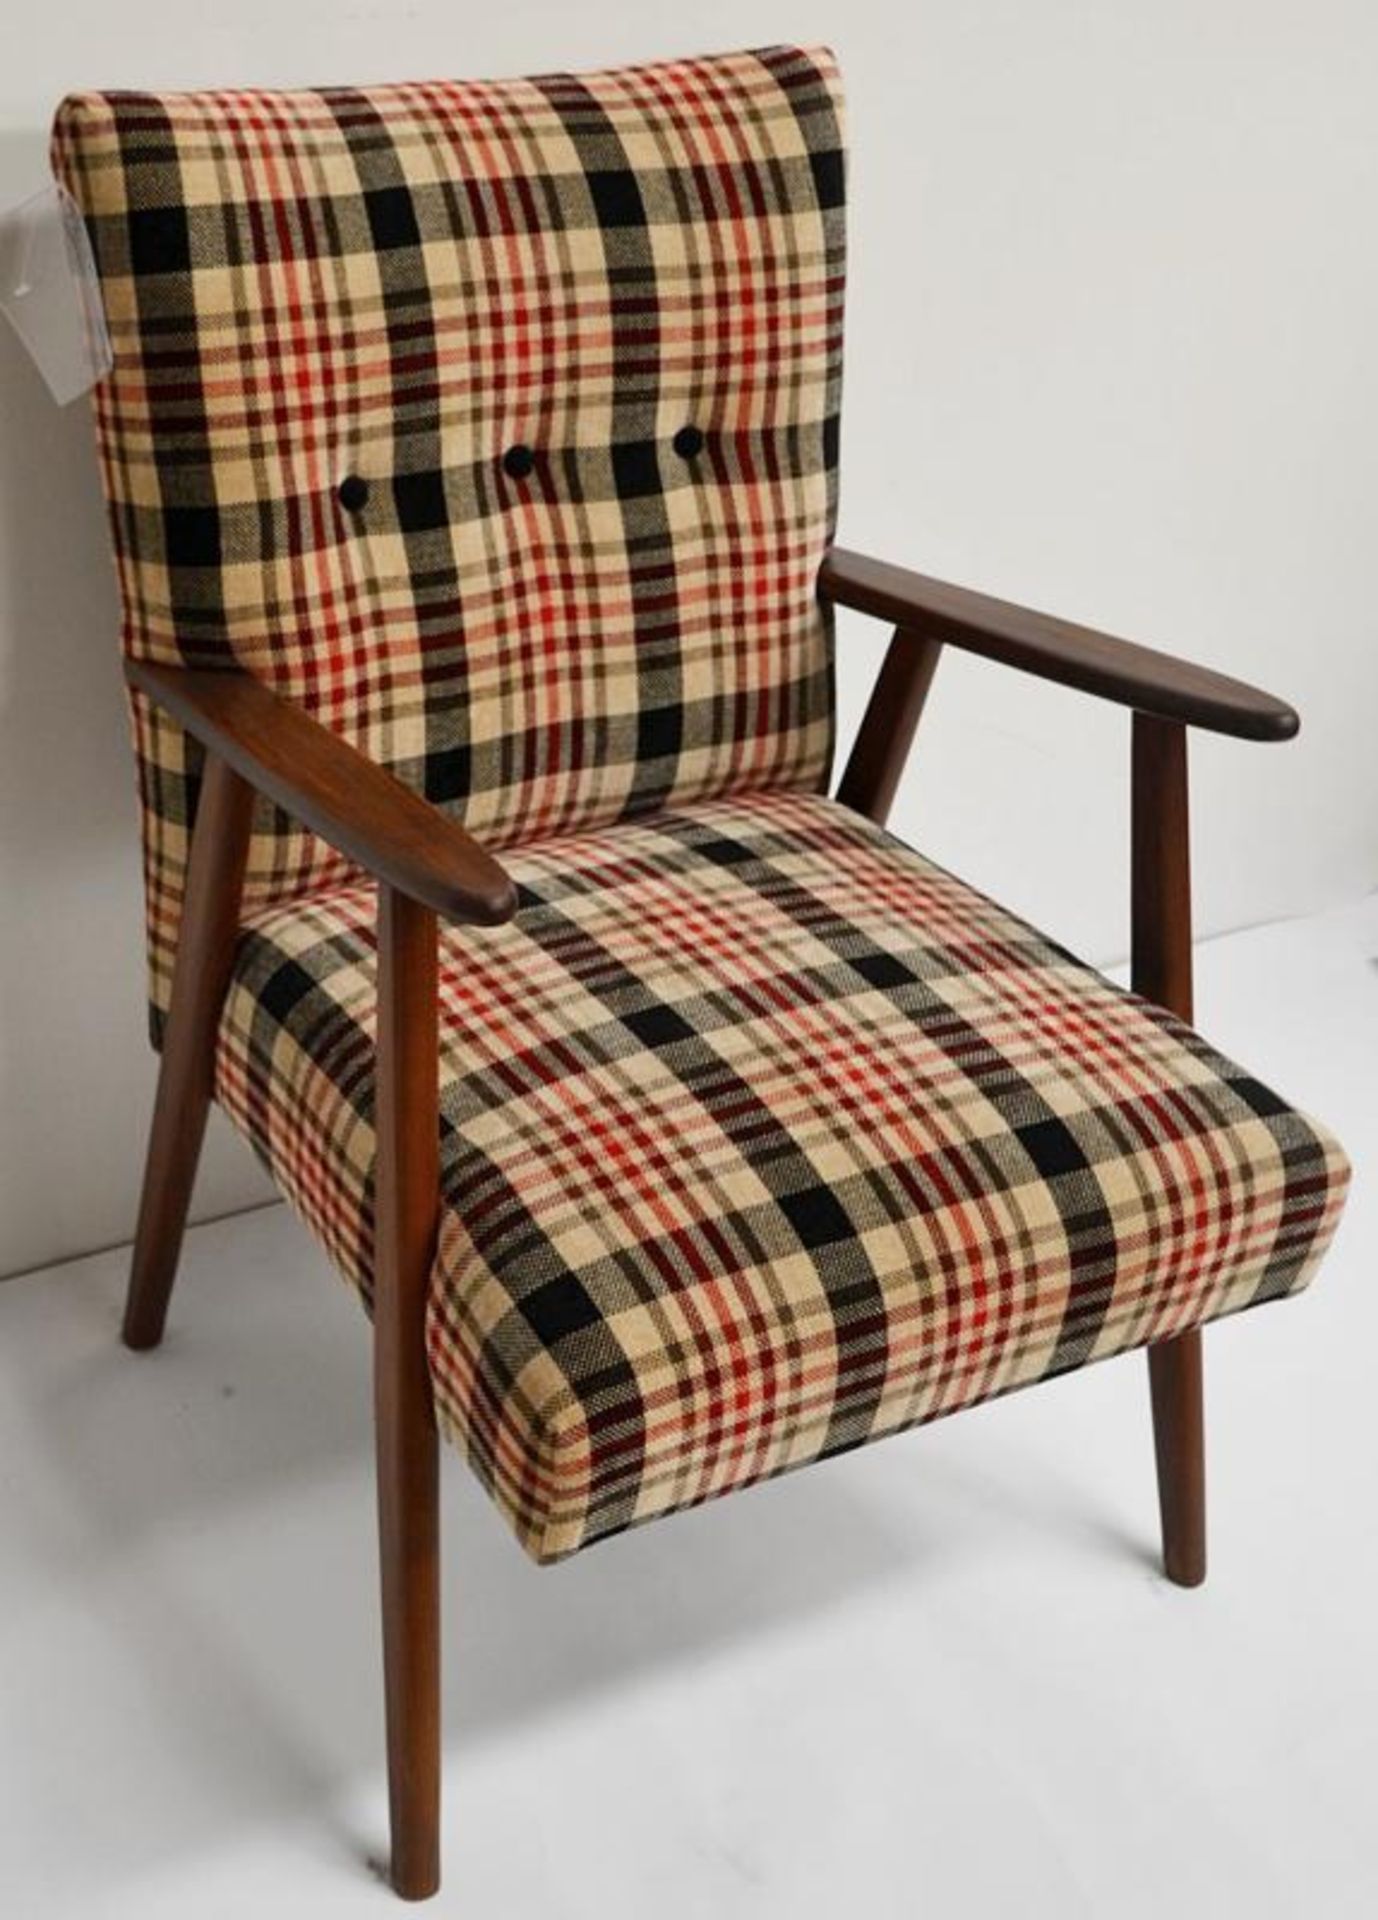 1 x JAB King Upholstery Mid Century Chair Upholstered In A 'Bourbon Pattern' - Dimensions (approx):